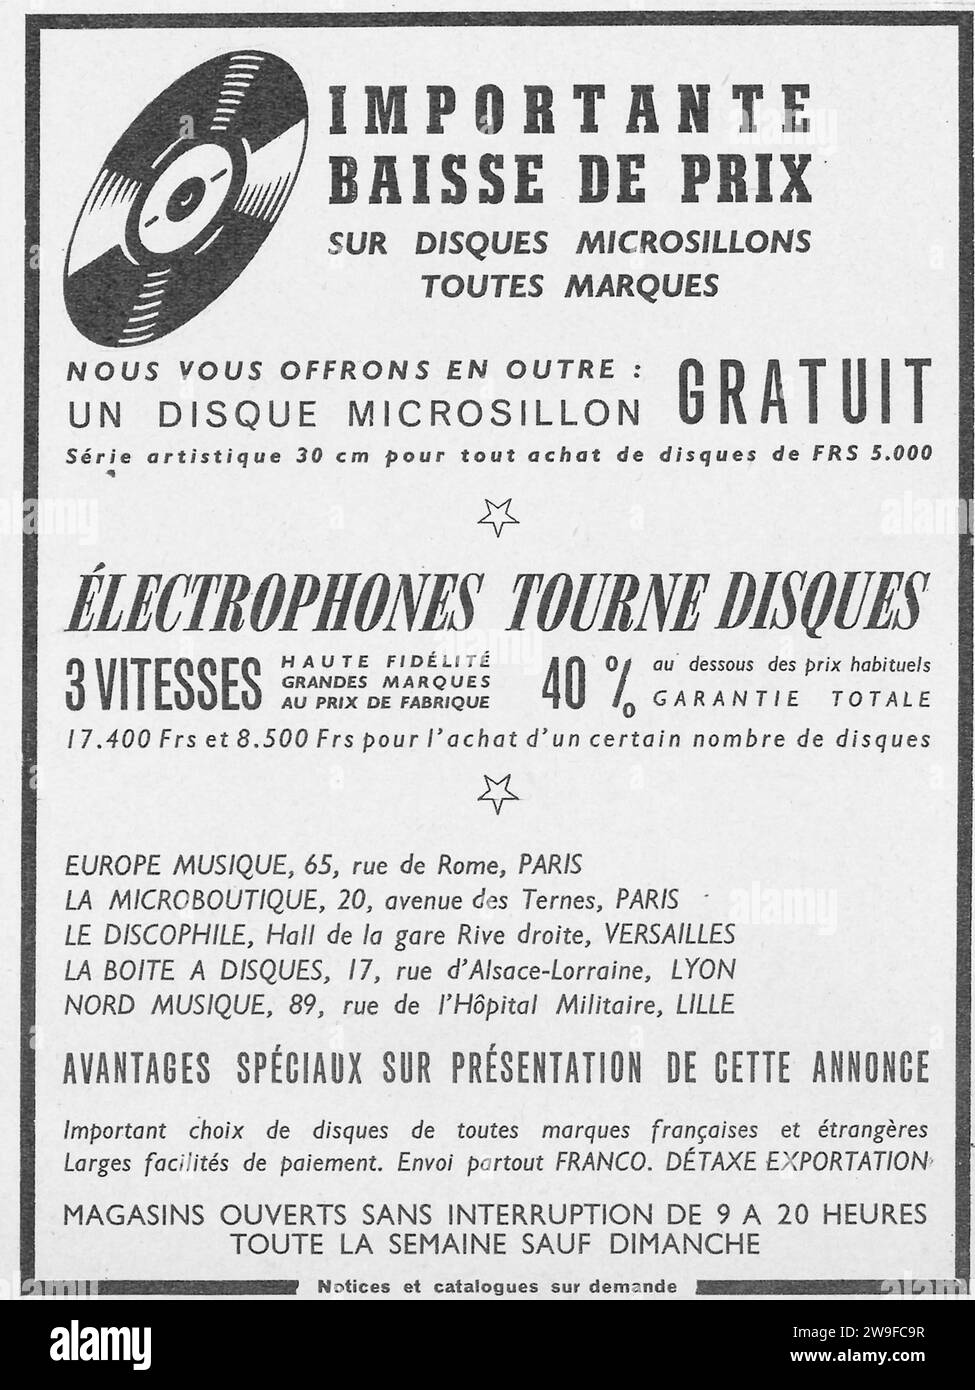 1954 Electrophone Long Play Records ad - électrophones tourne disques Stockfoto